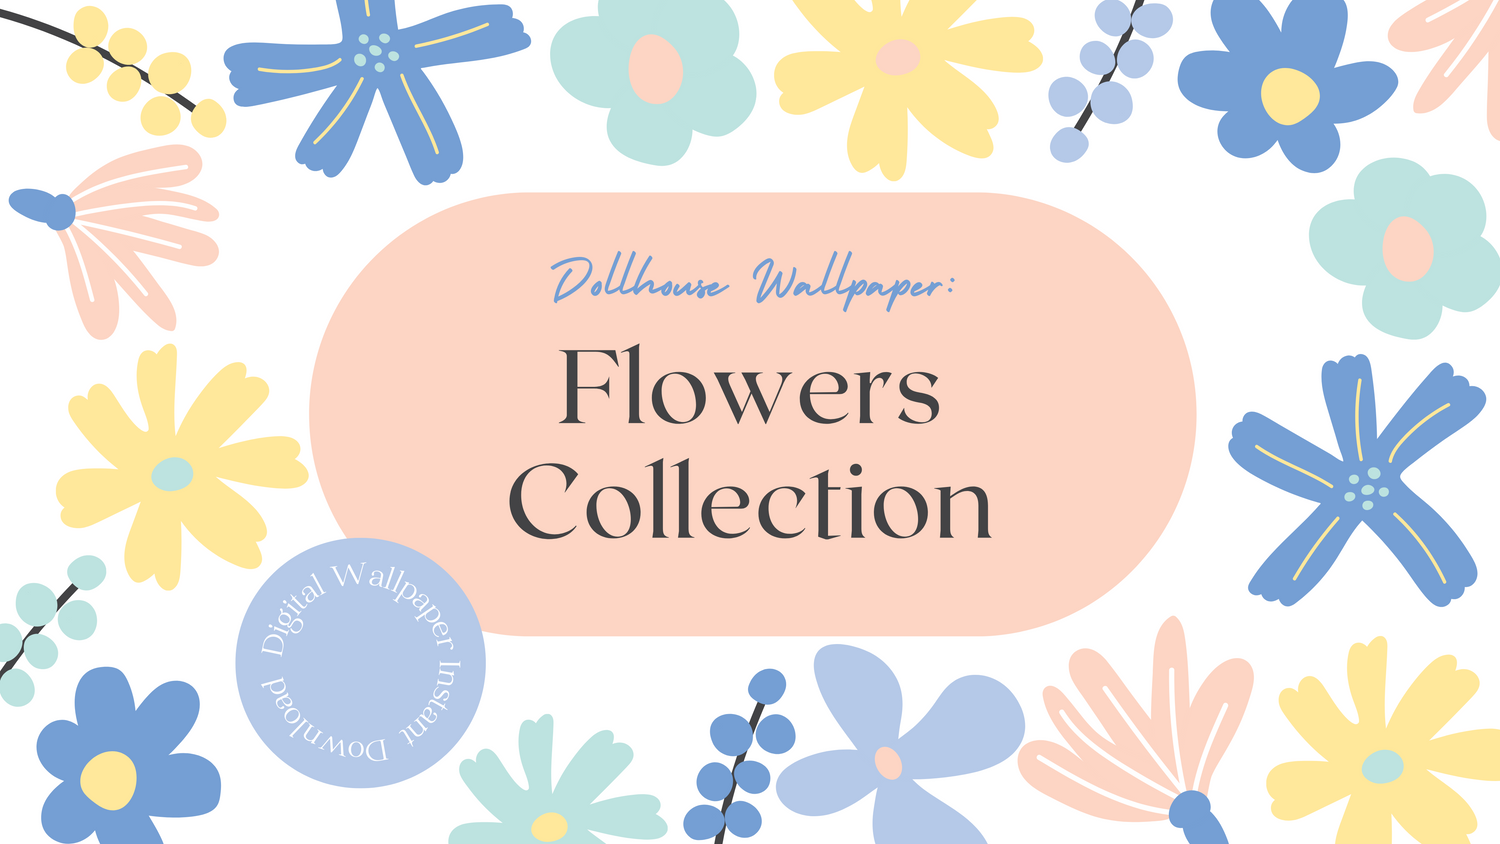 Dollhouse Wallpaper Flowers Collection